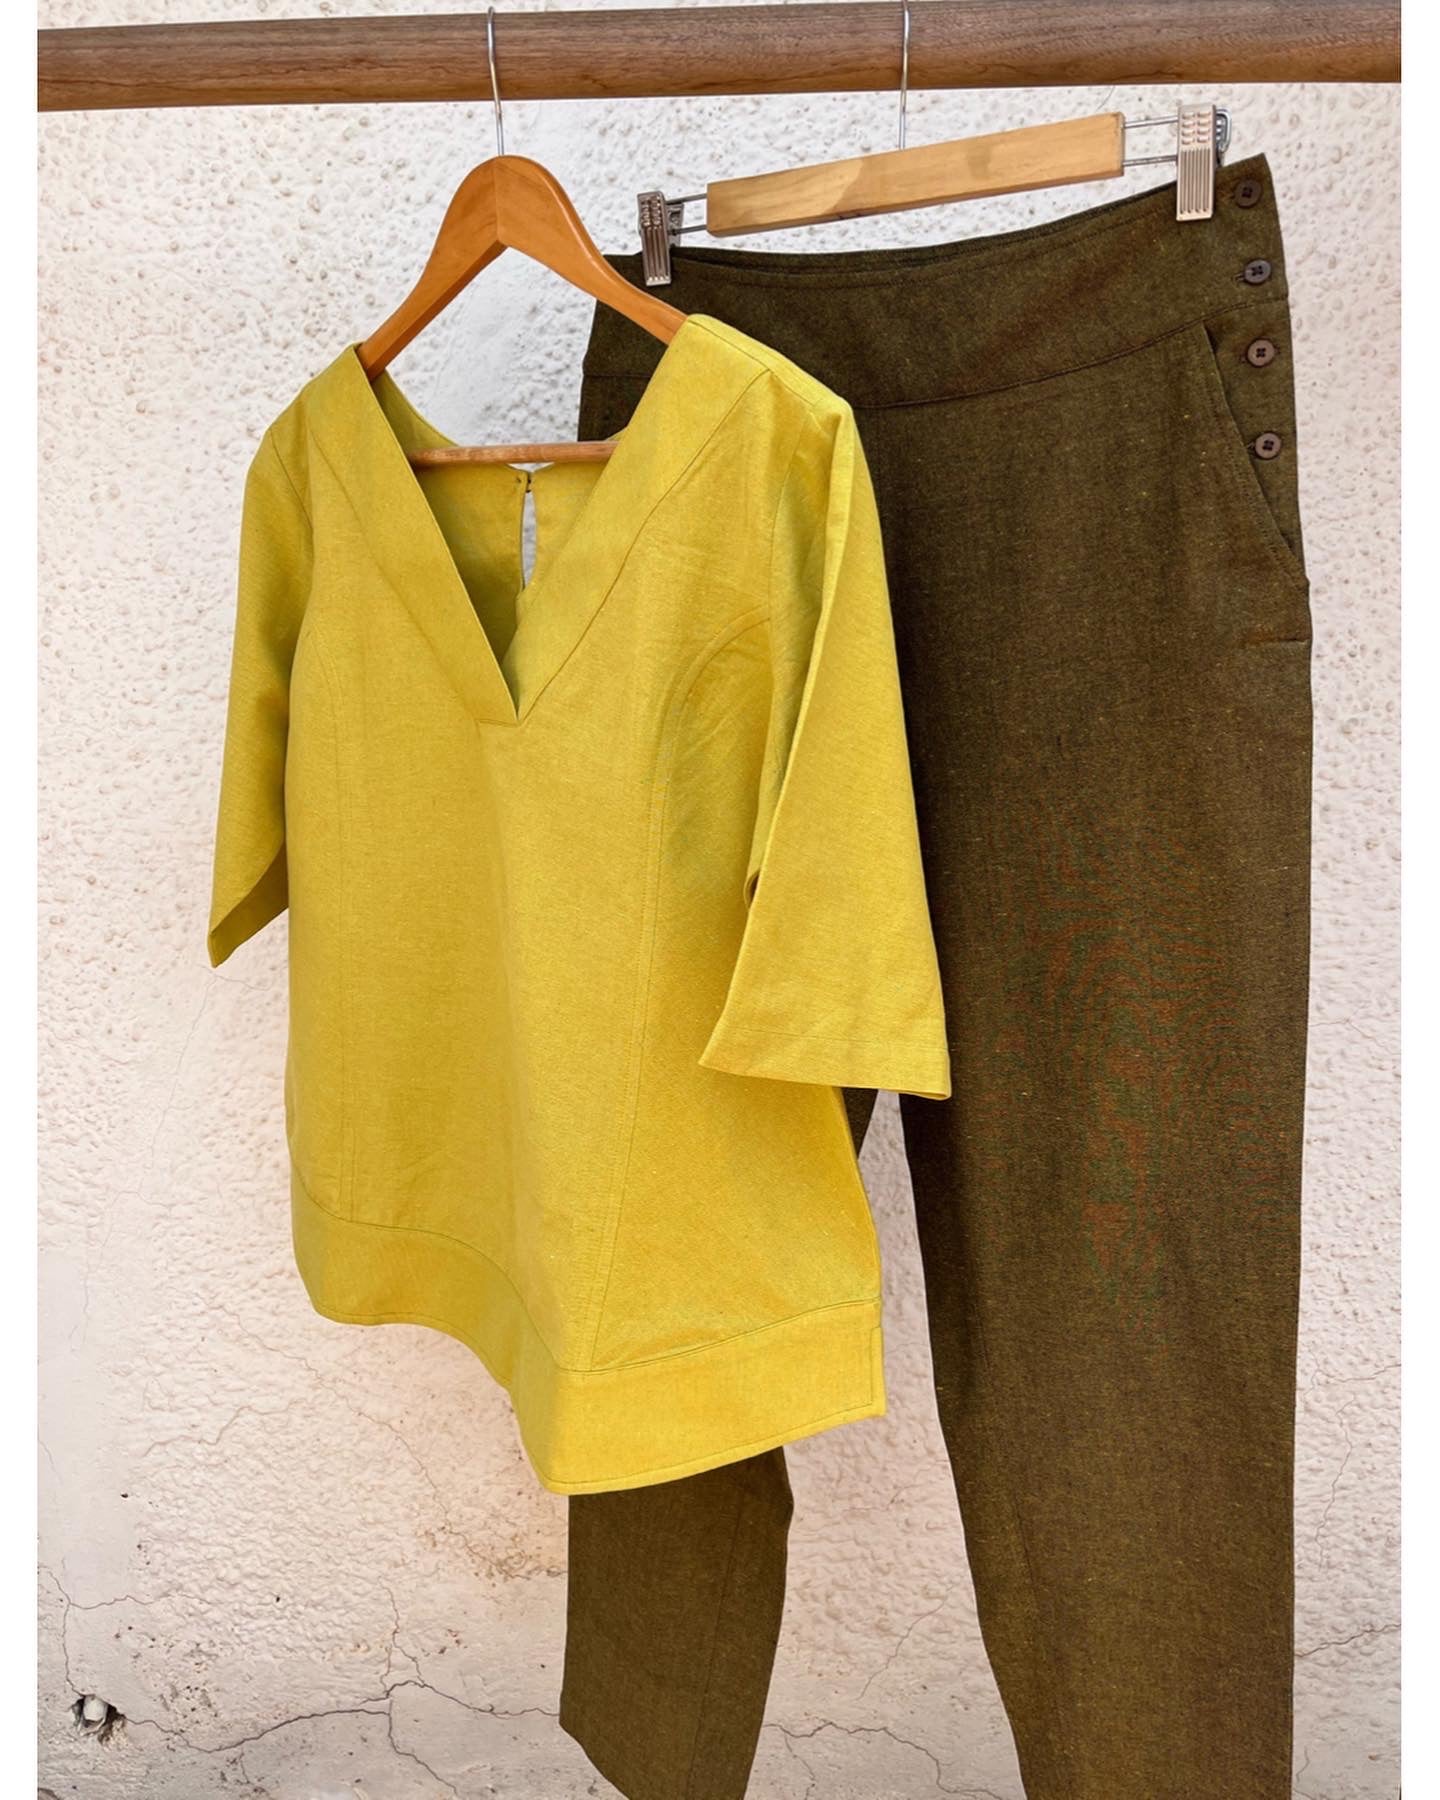 Gypsy Top (sleeved) - Yellow Green Cotton